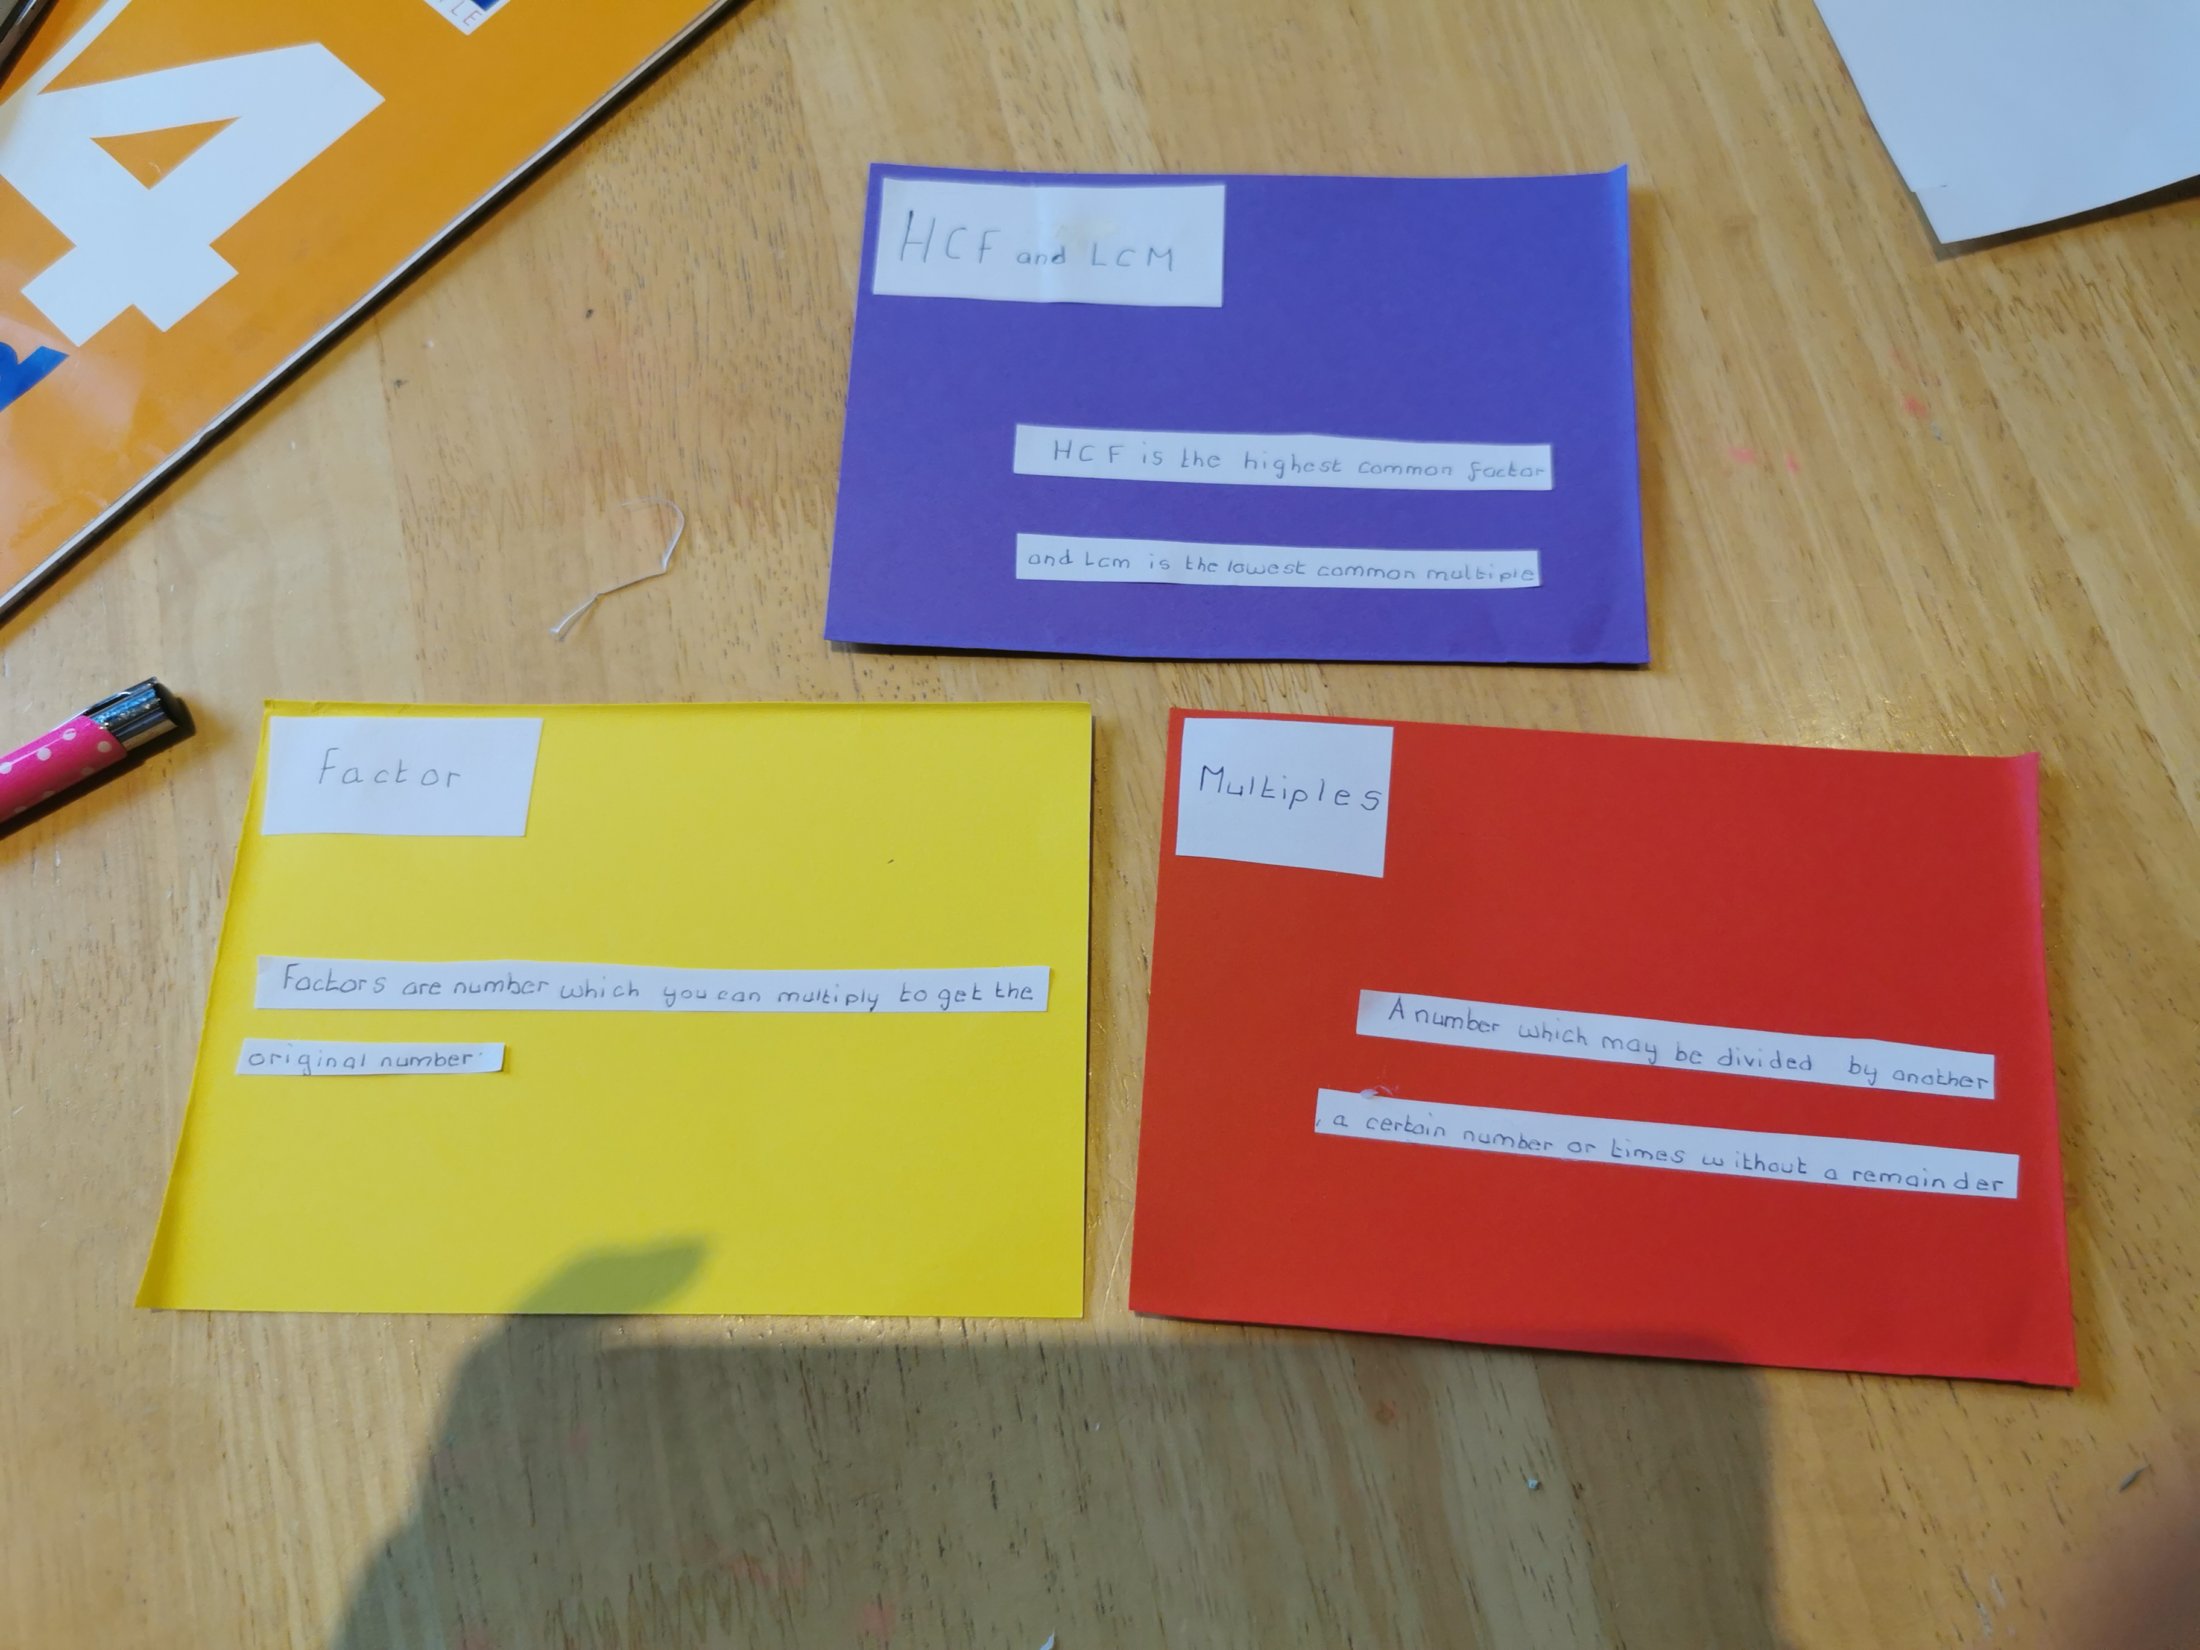 Year 9 - HCF And LCM Revision Cards